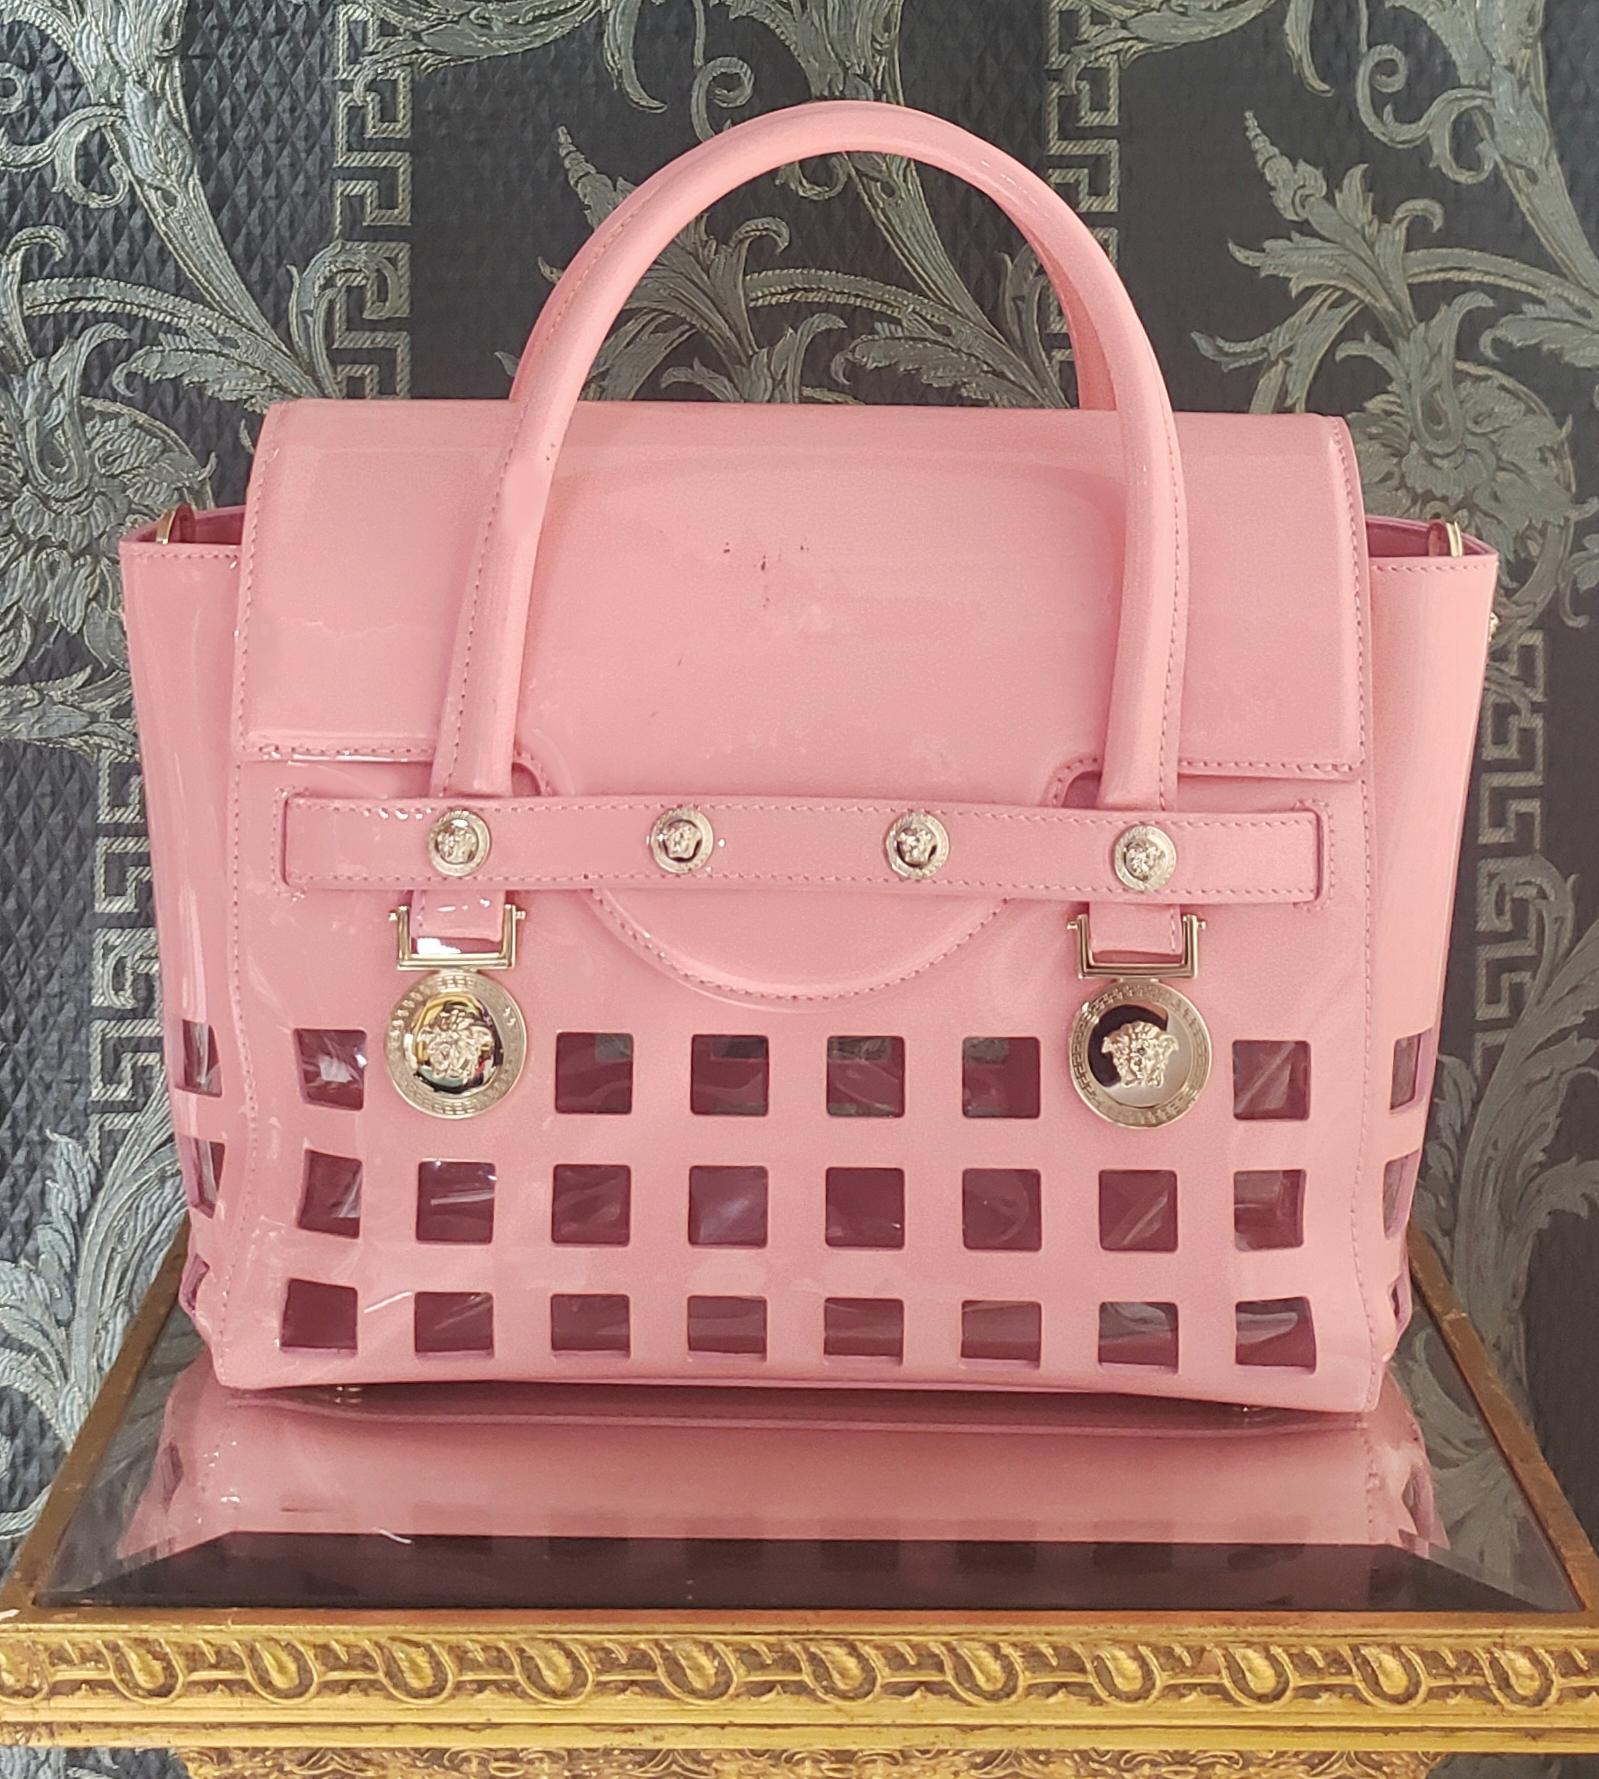 Women's S/S 2015 look # 11 VERSACE PERFORATED PATENT PINK LEATHER BAG For Sale